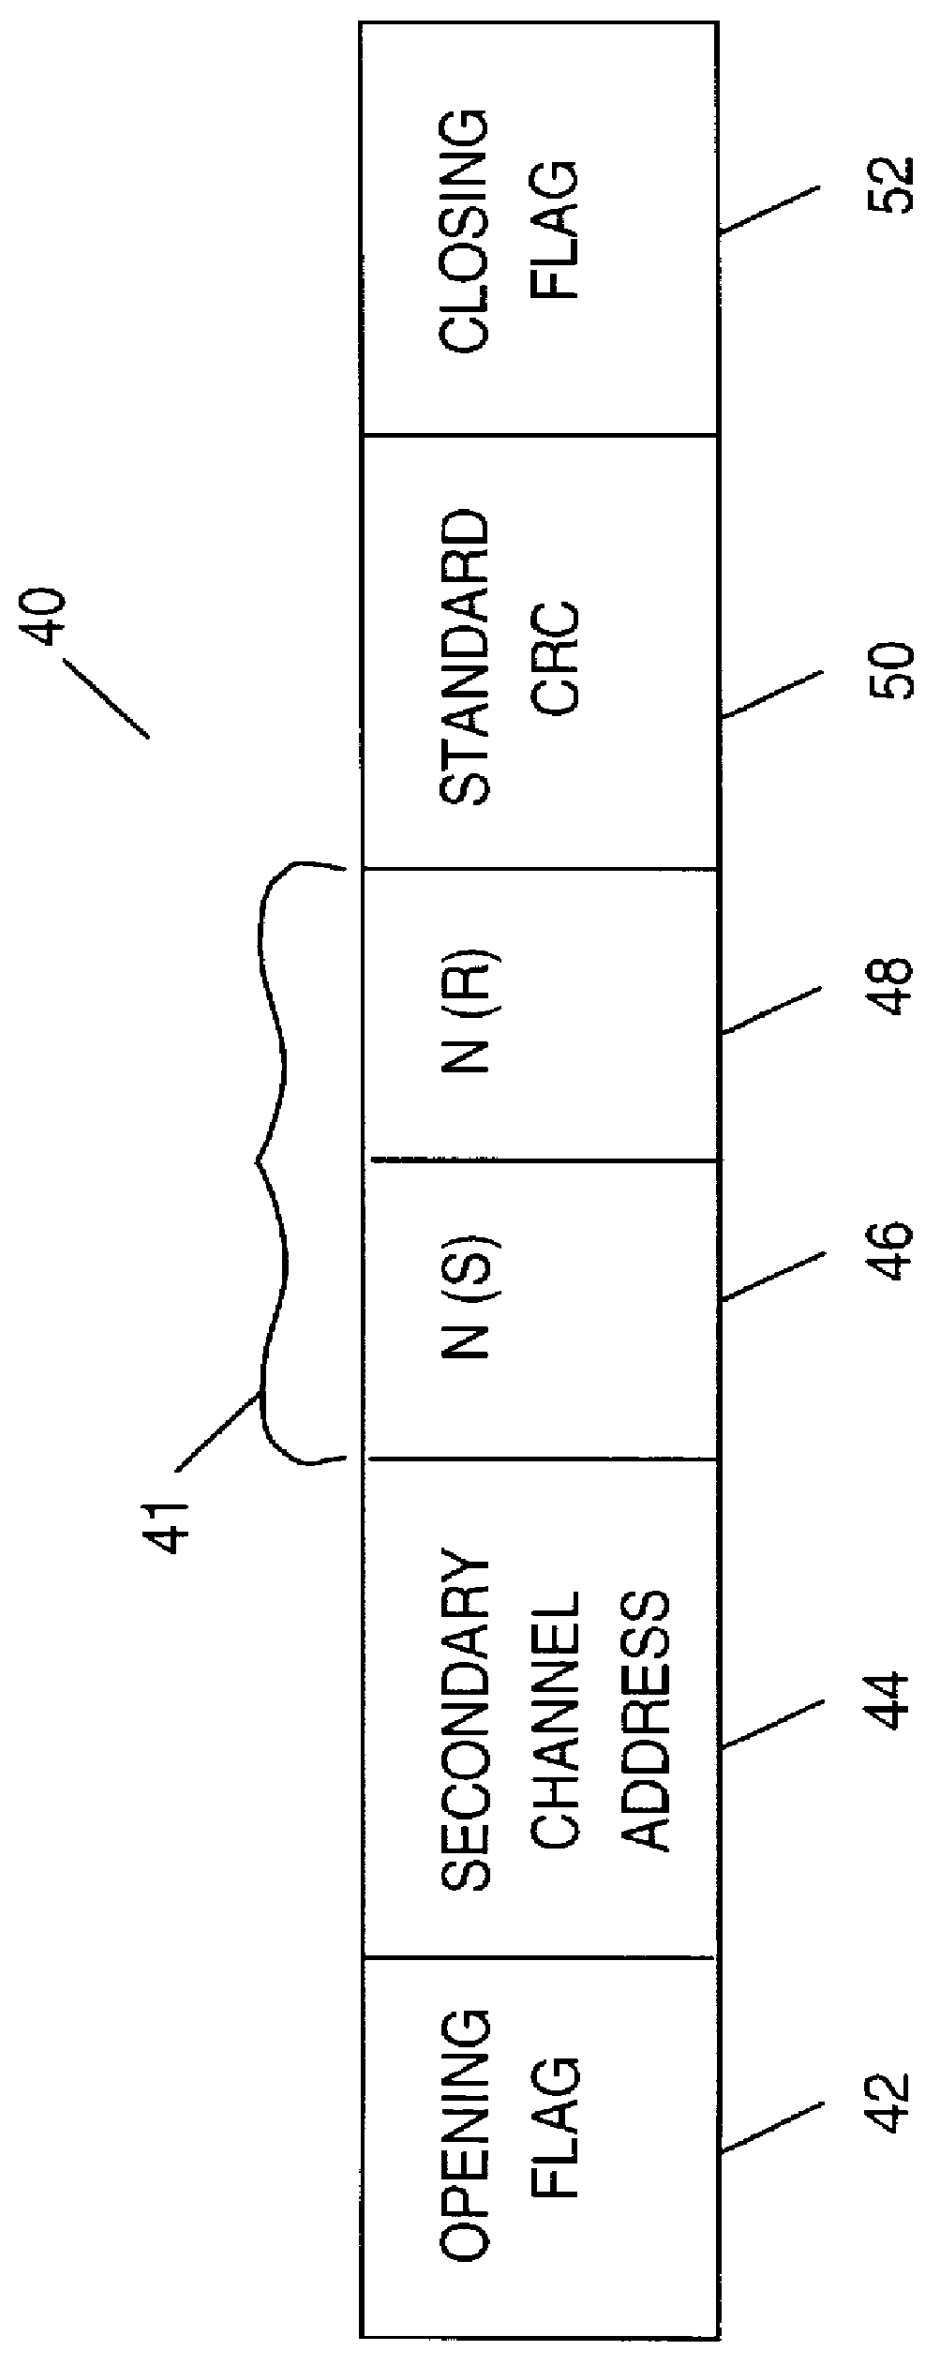 Method and system in a data communications system for the establishment of multiple, related data links and the utilization of one data link for recovery of errors detected on another link